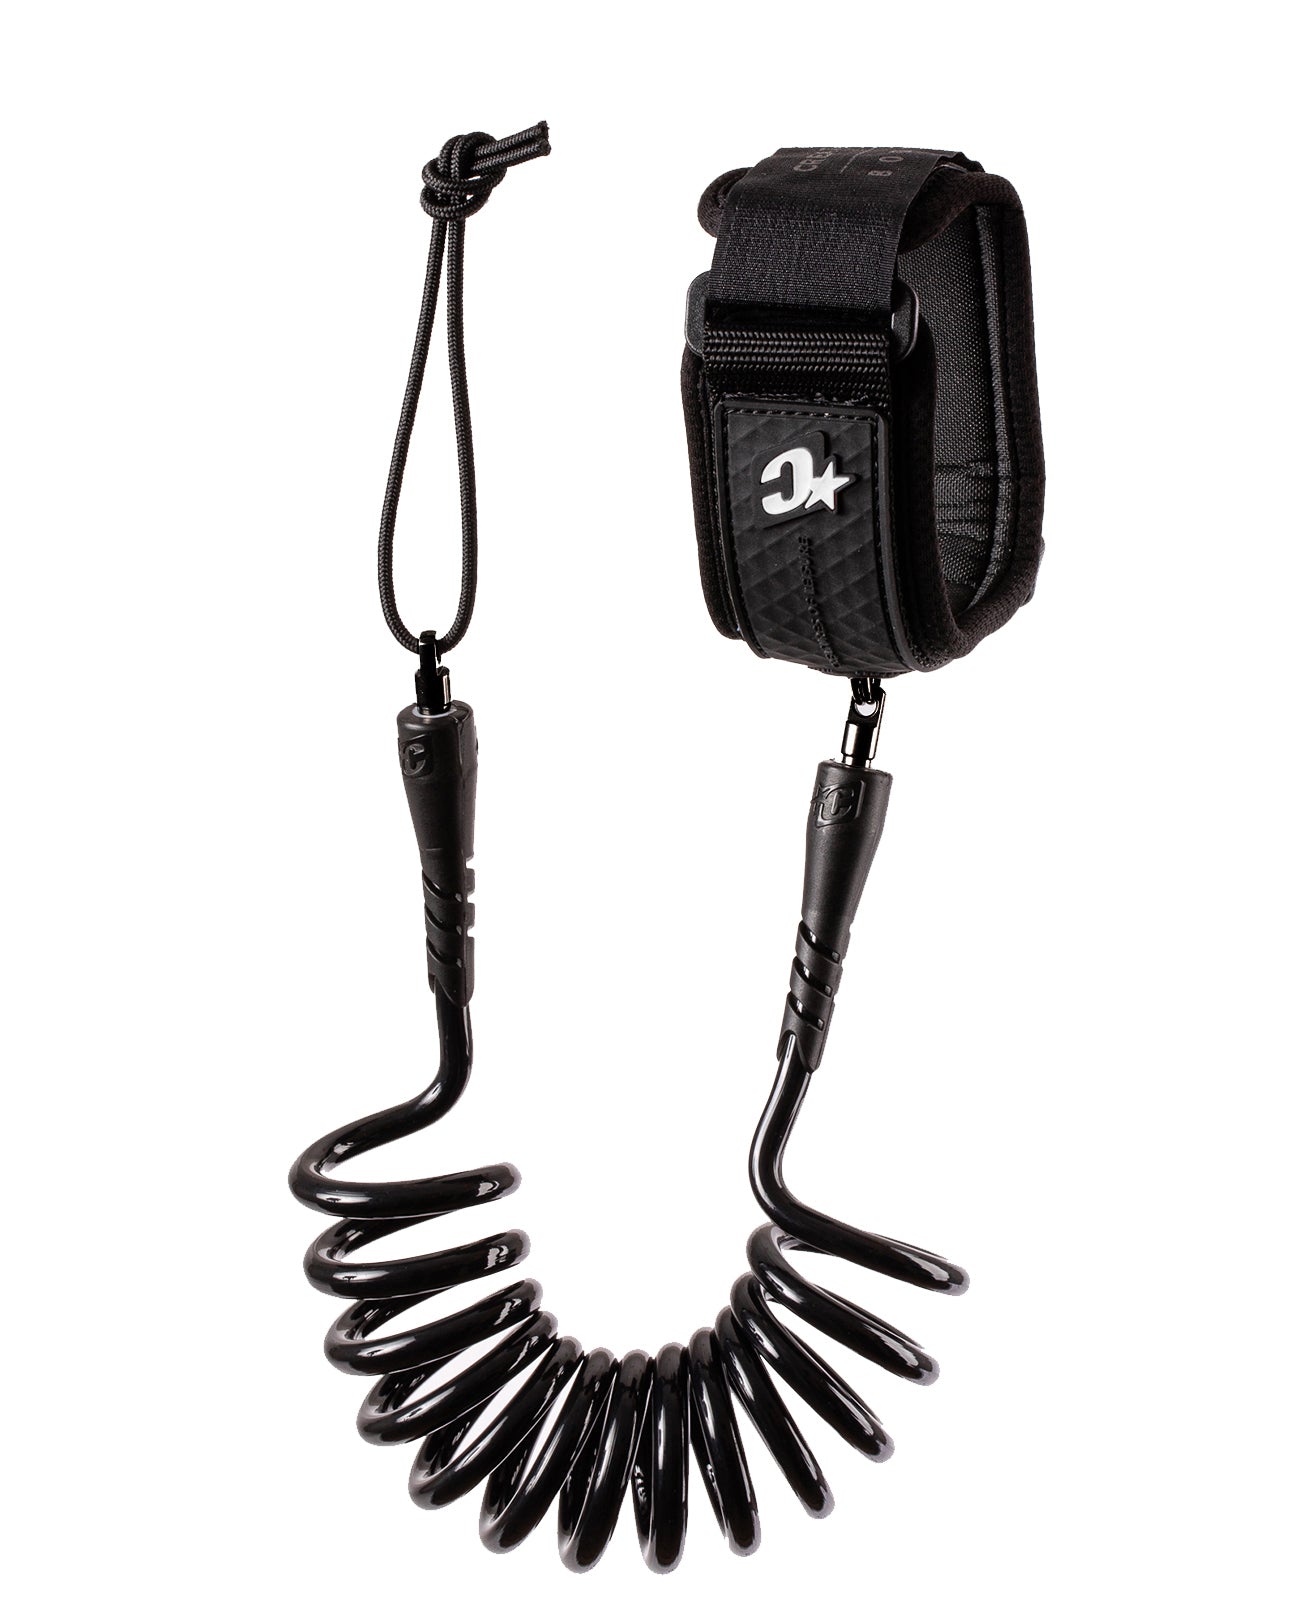 Creatures Reliance Reef Bicep M Leash